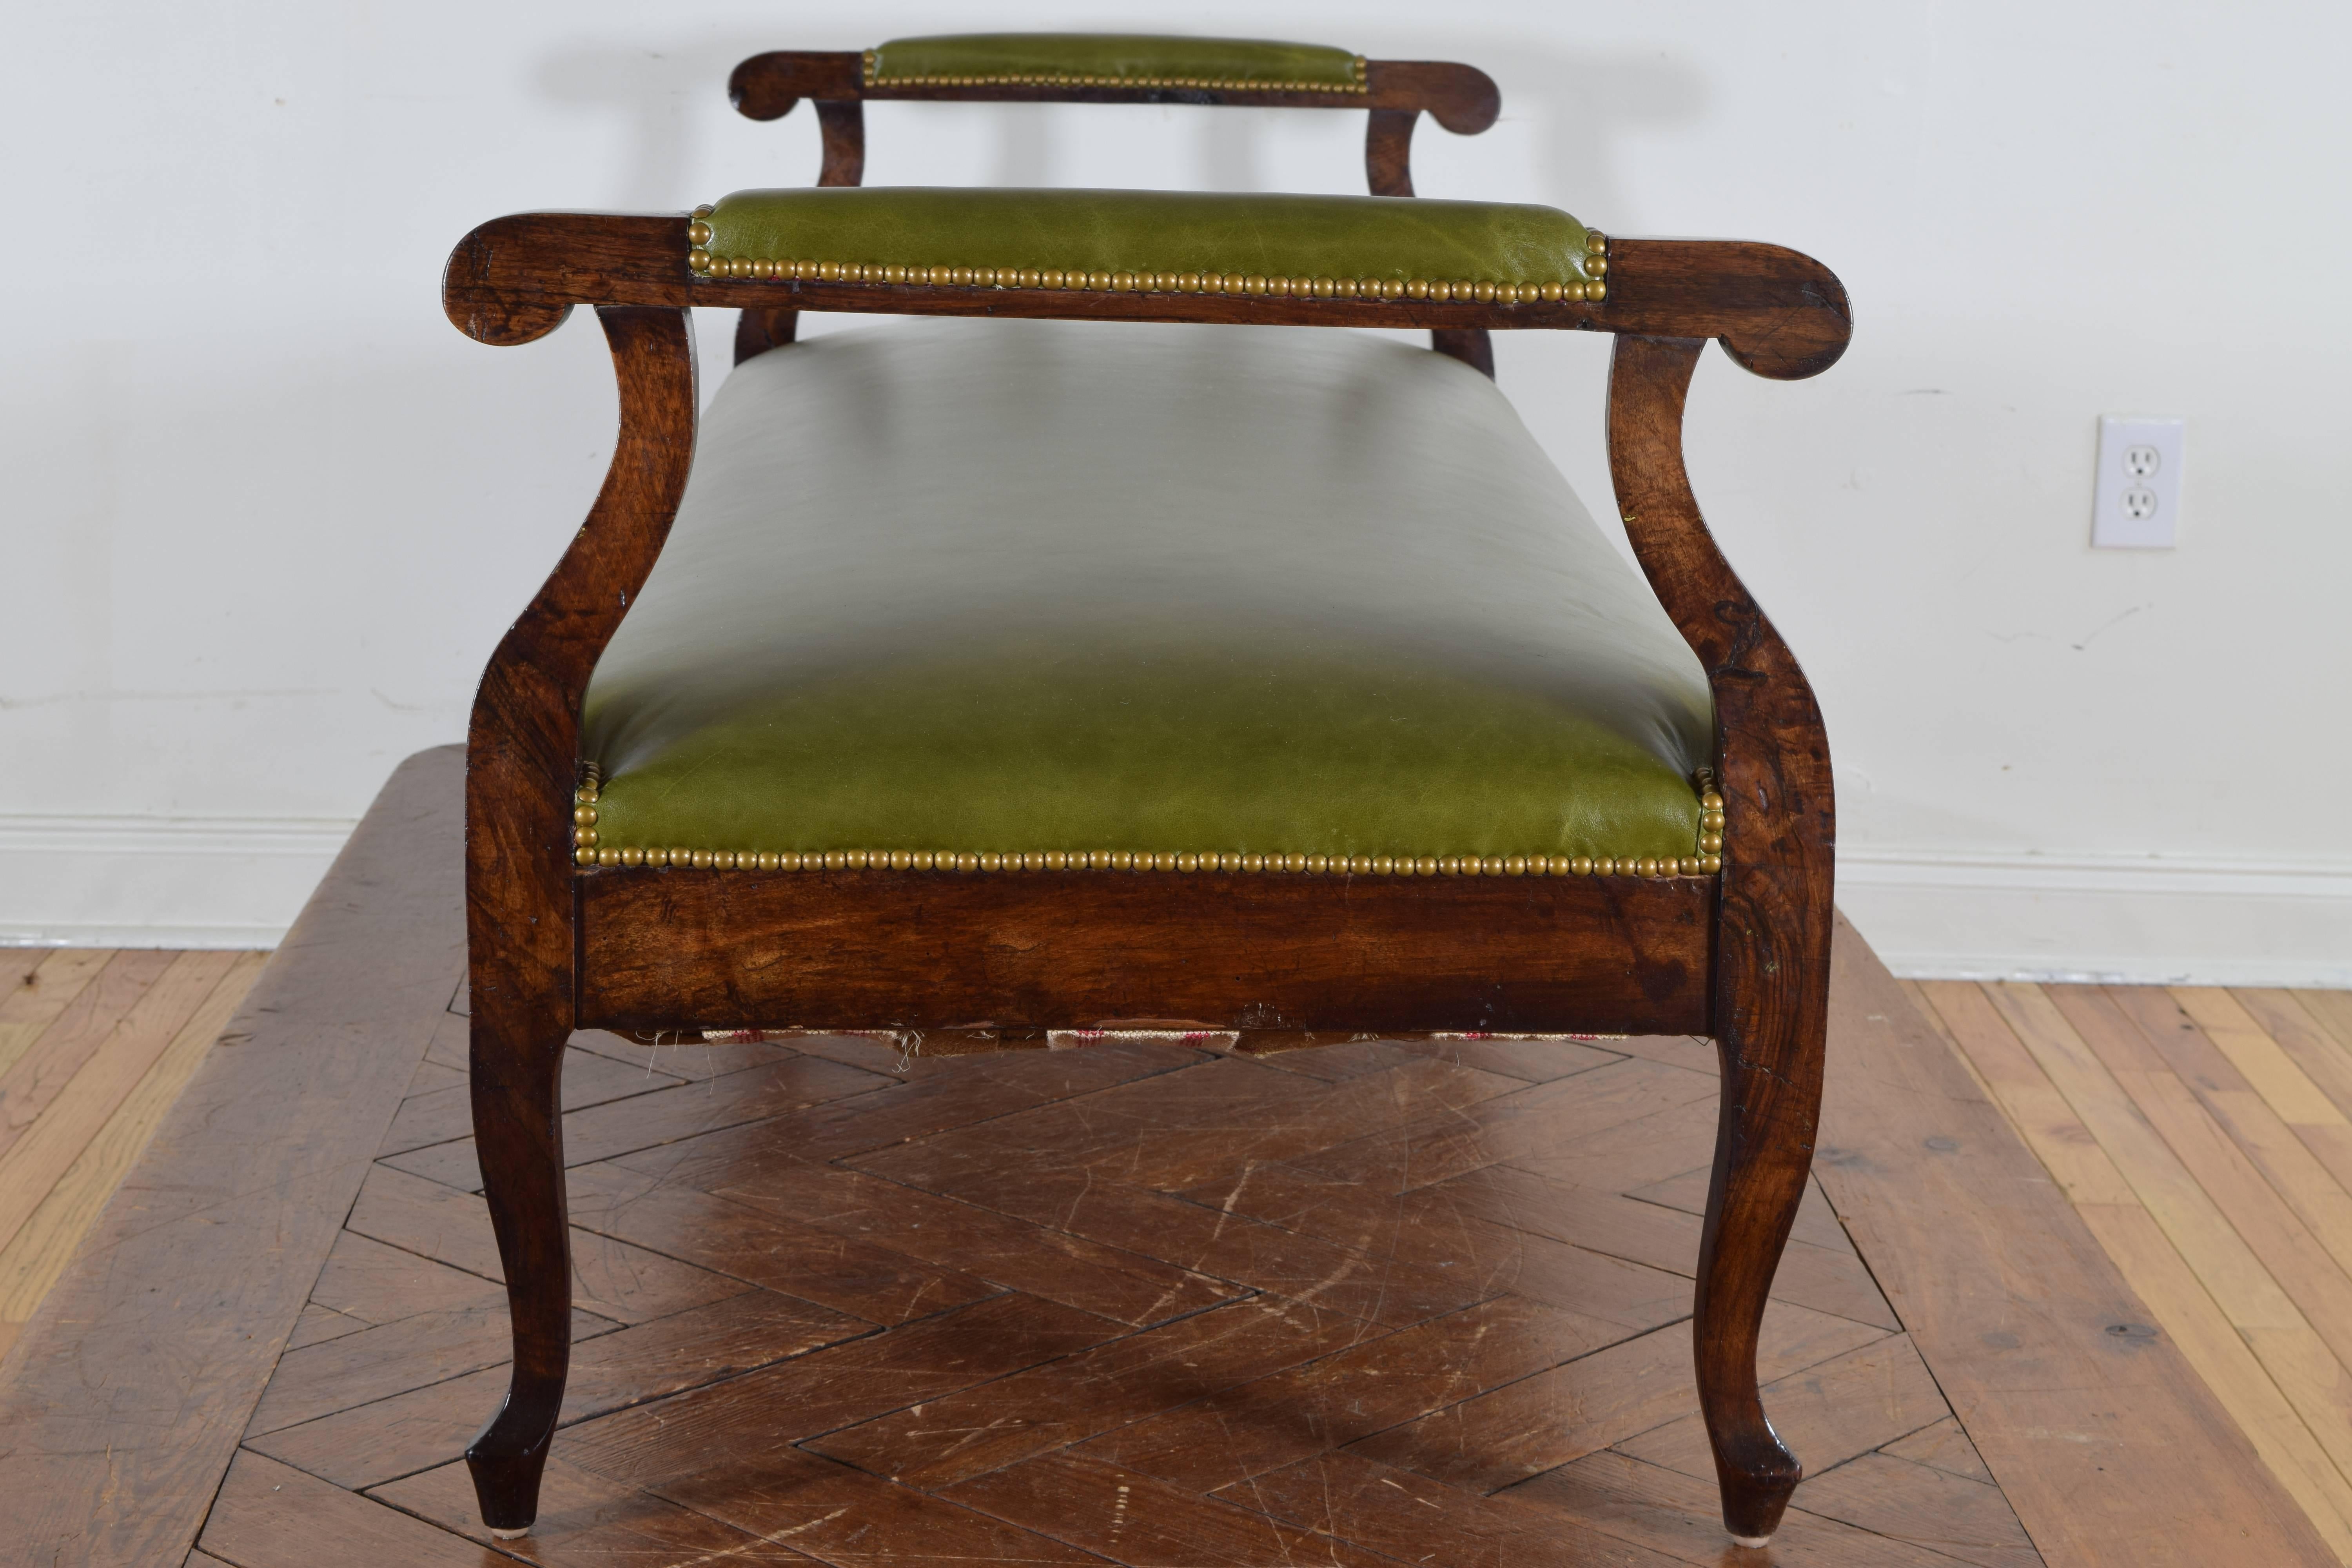 Neoclassical French Late Neoclassic Walnut and Leather Upholstered Lit De Repos, circa 1835